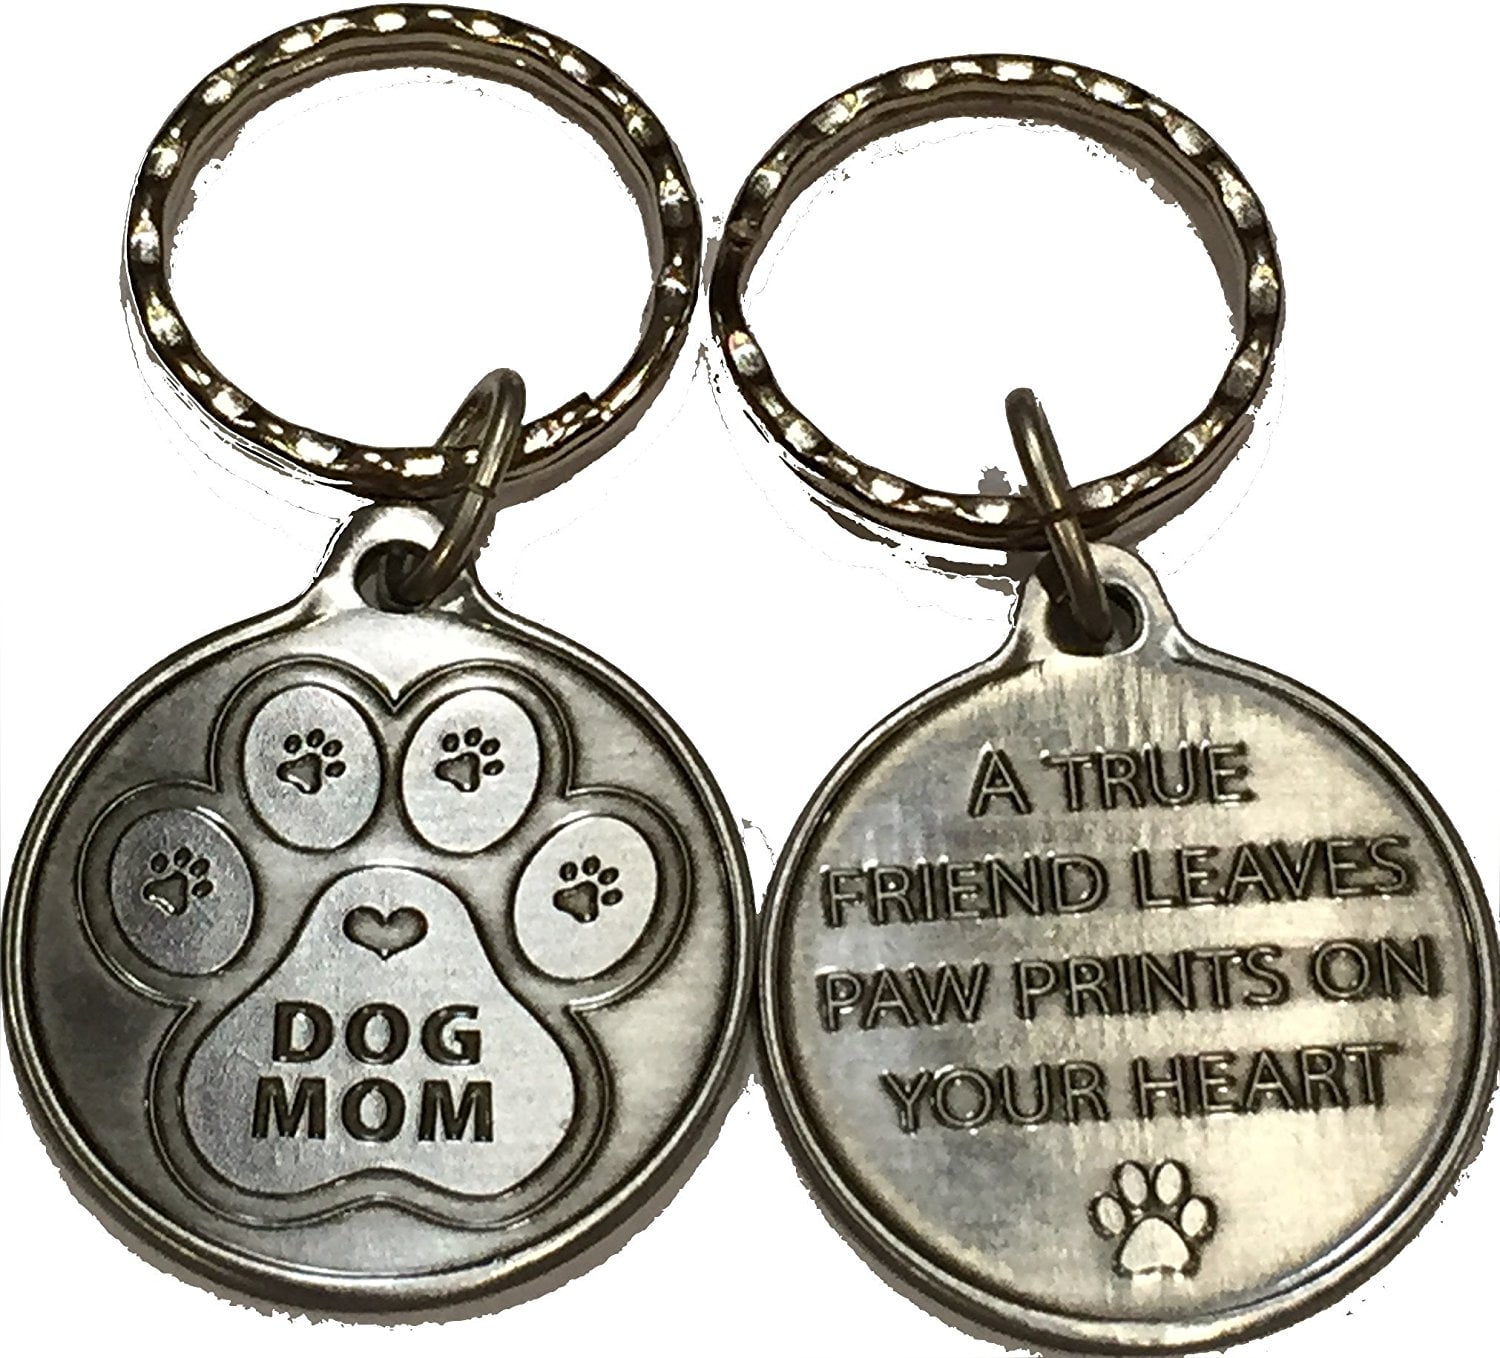 Dog Mom - A True Friend Leaves Paw Prints On Your Heart Keychain Pewter  Color